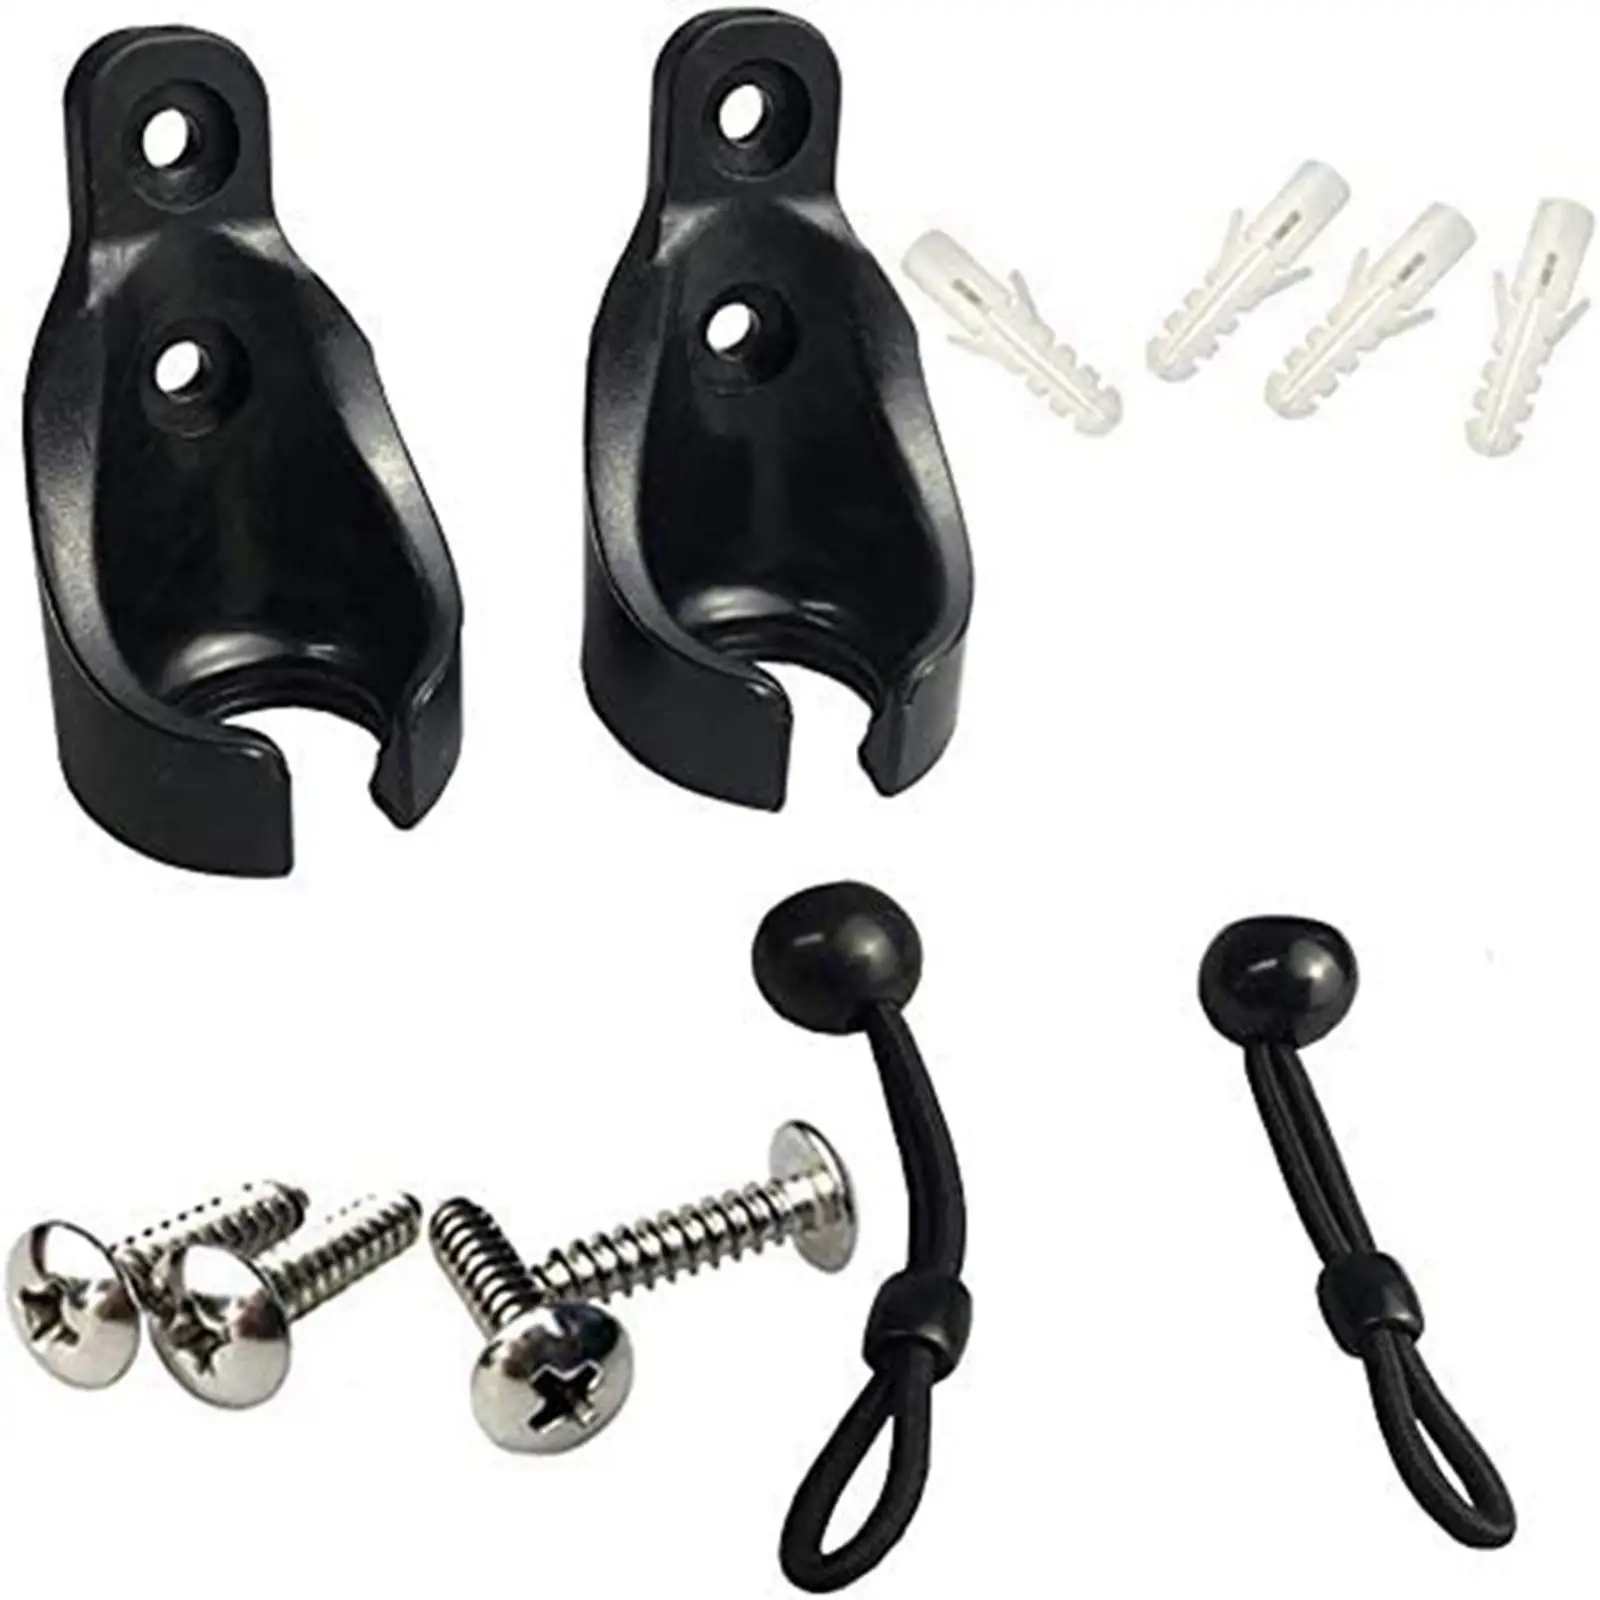 Bungee End cap set Spare Parts Repair Easy to Install for Blackout